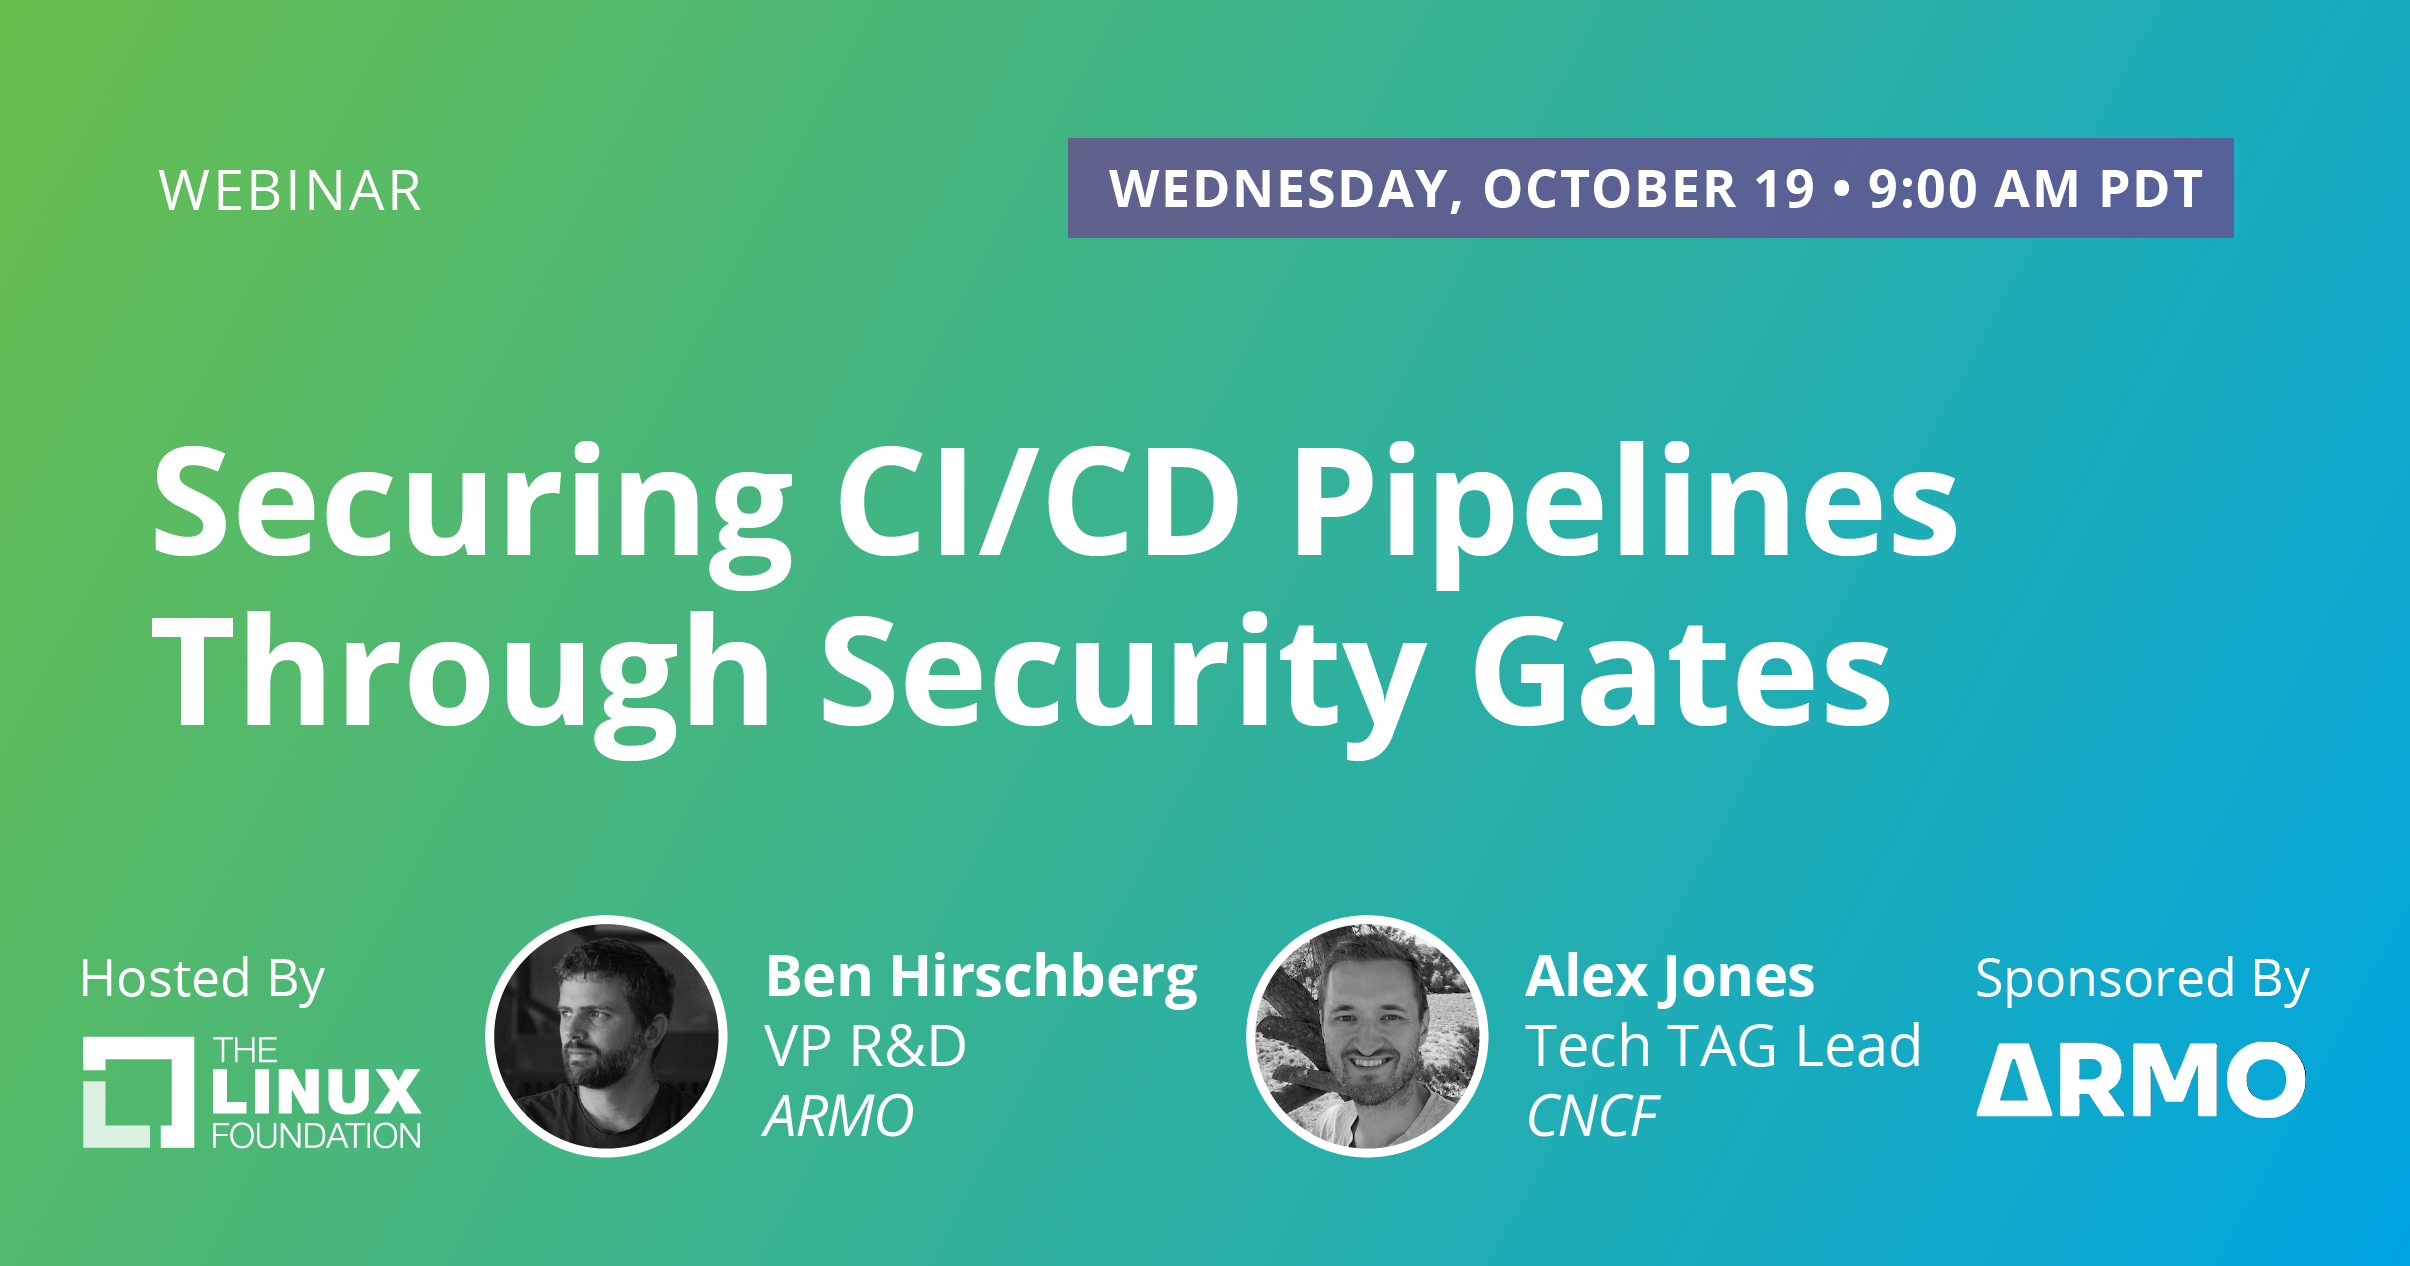 Securing CI/CD Pipelines Through Security Gates featured image